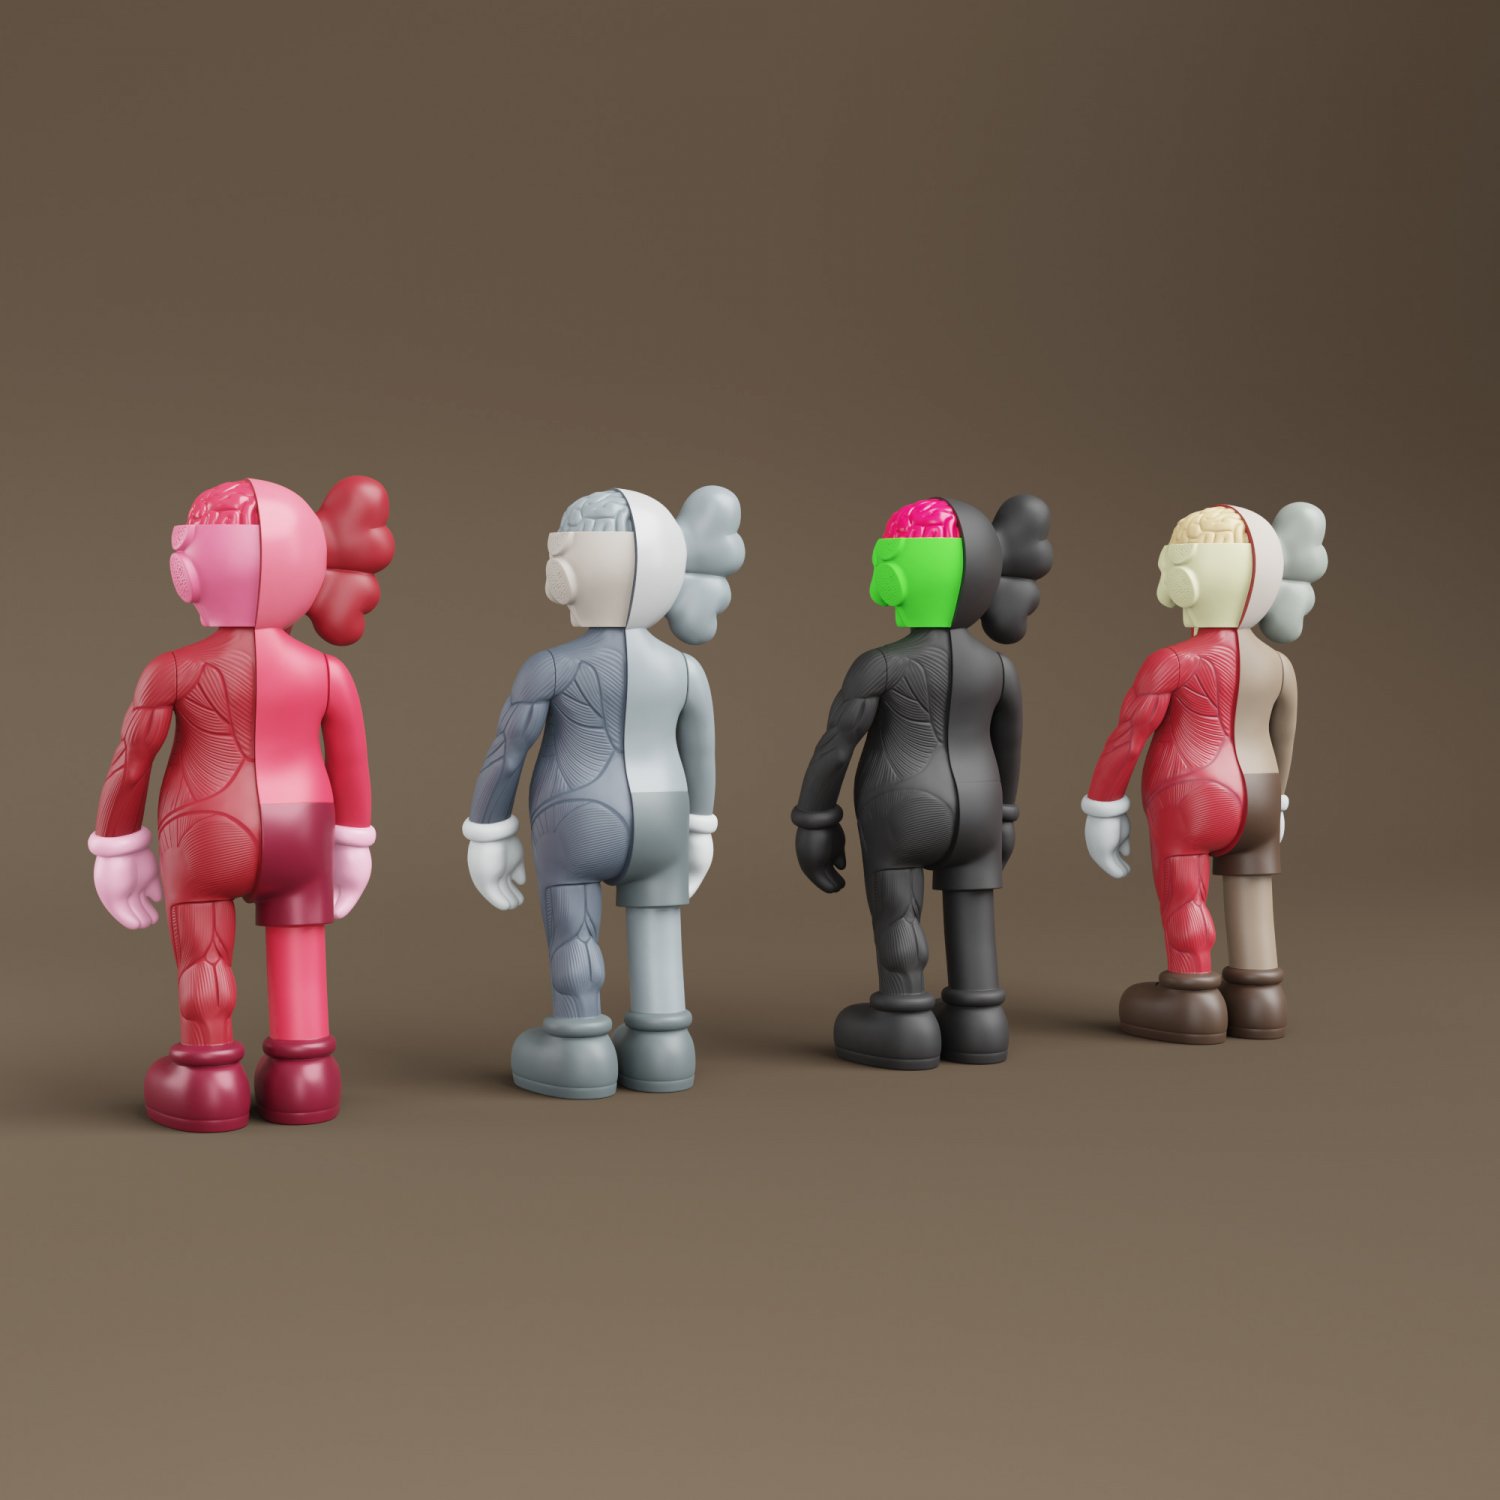 3D printer KAWS KEYCHAIN BFF X DESSECTED X COMPANION • made with